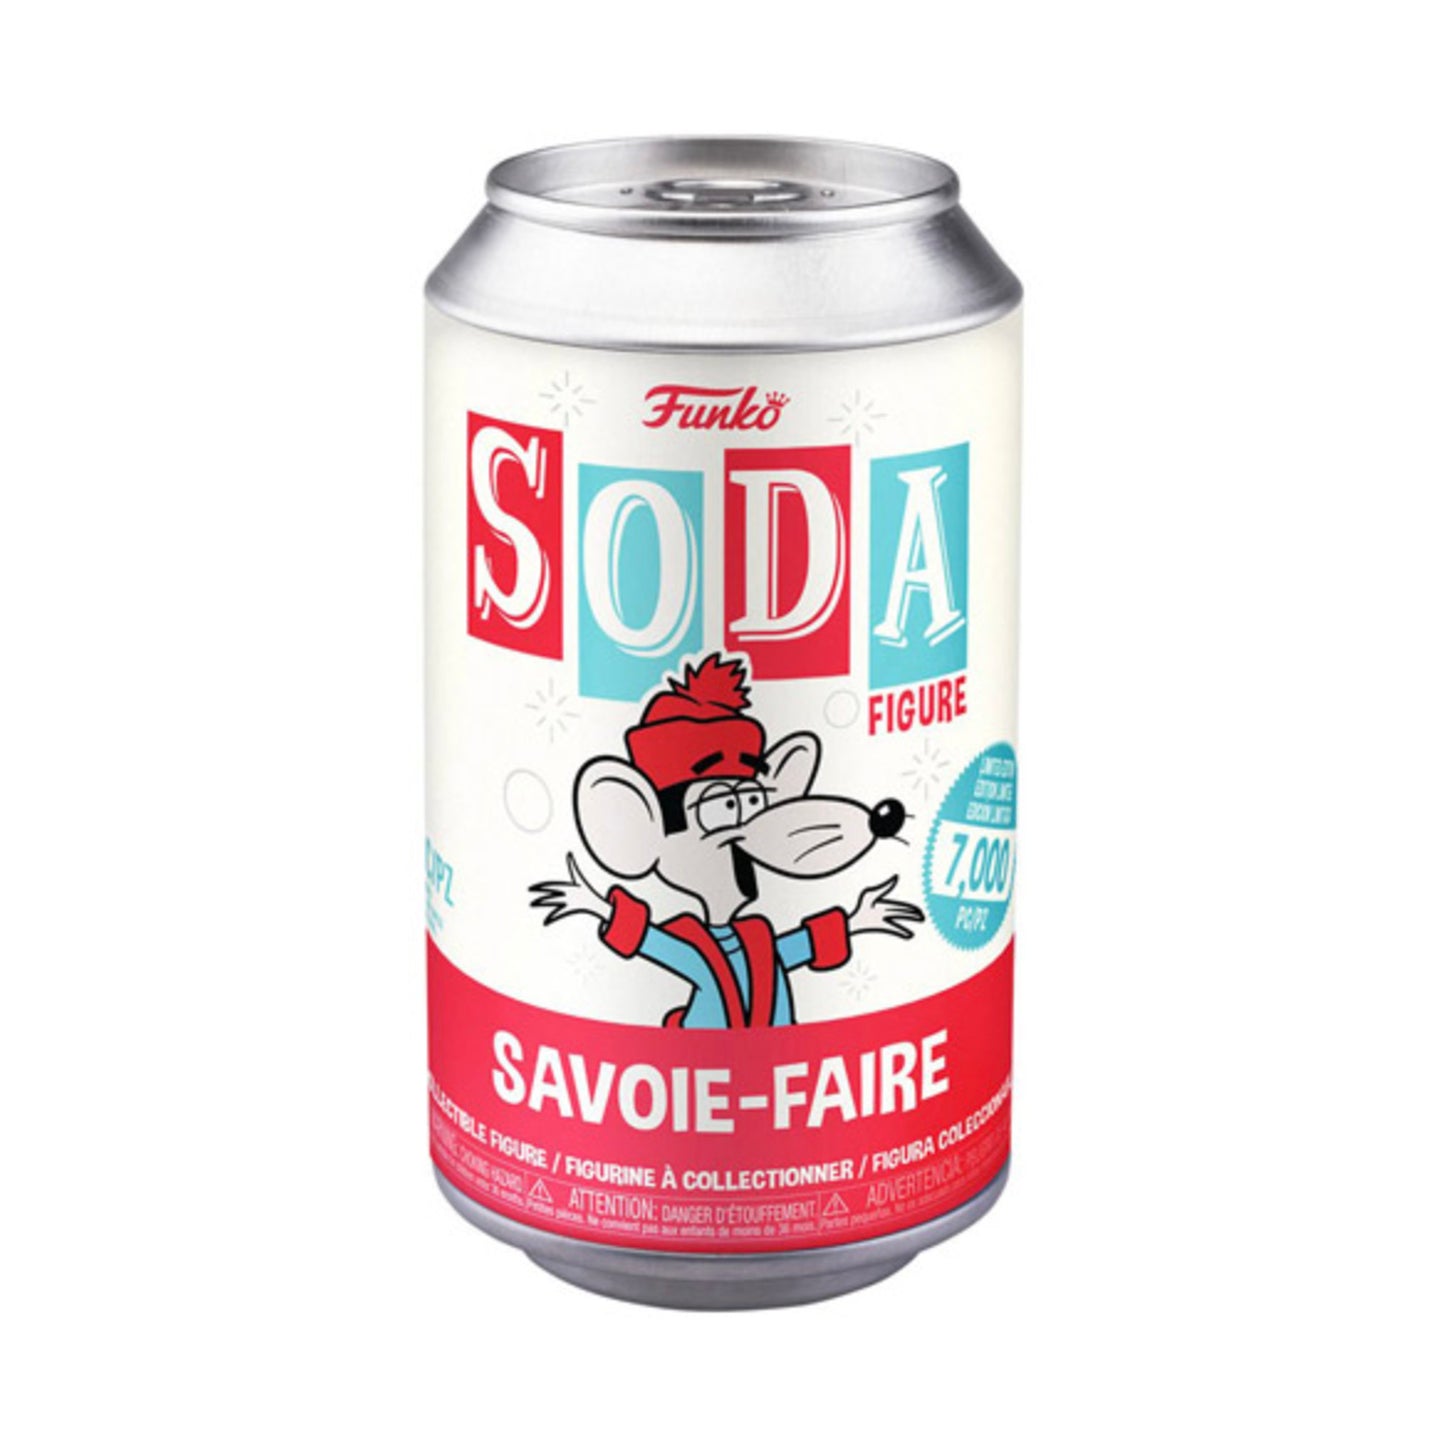 Funko Vinyl SODA: Savoie-Faire 7,000 Limited Edition (1 in 6 Chance at Chase)